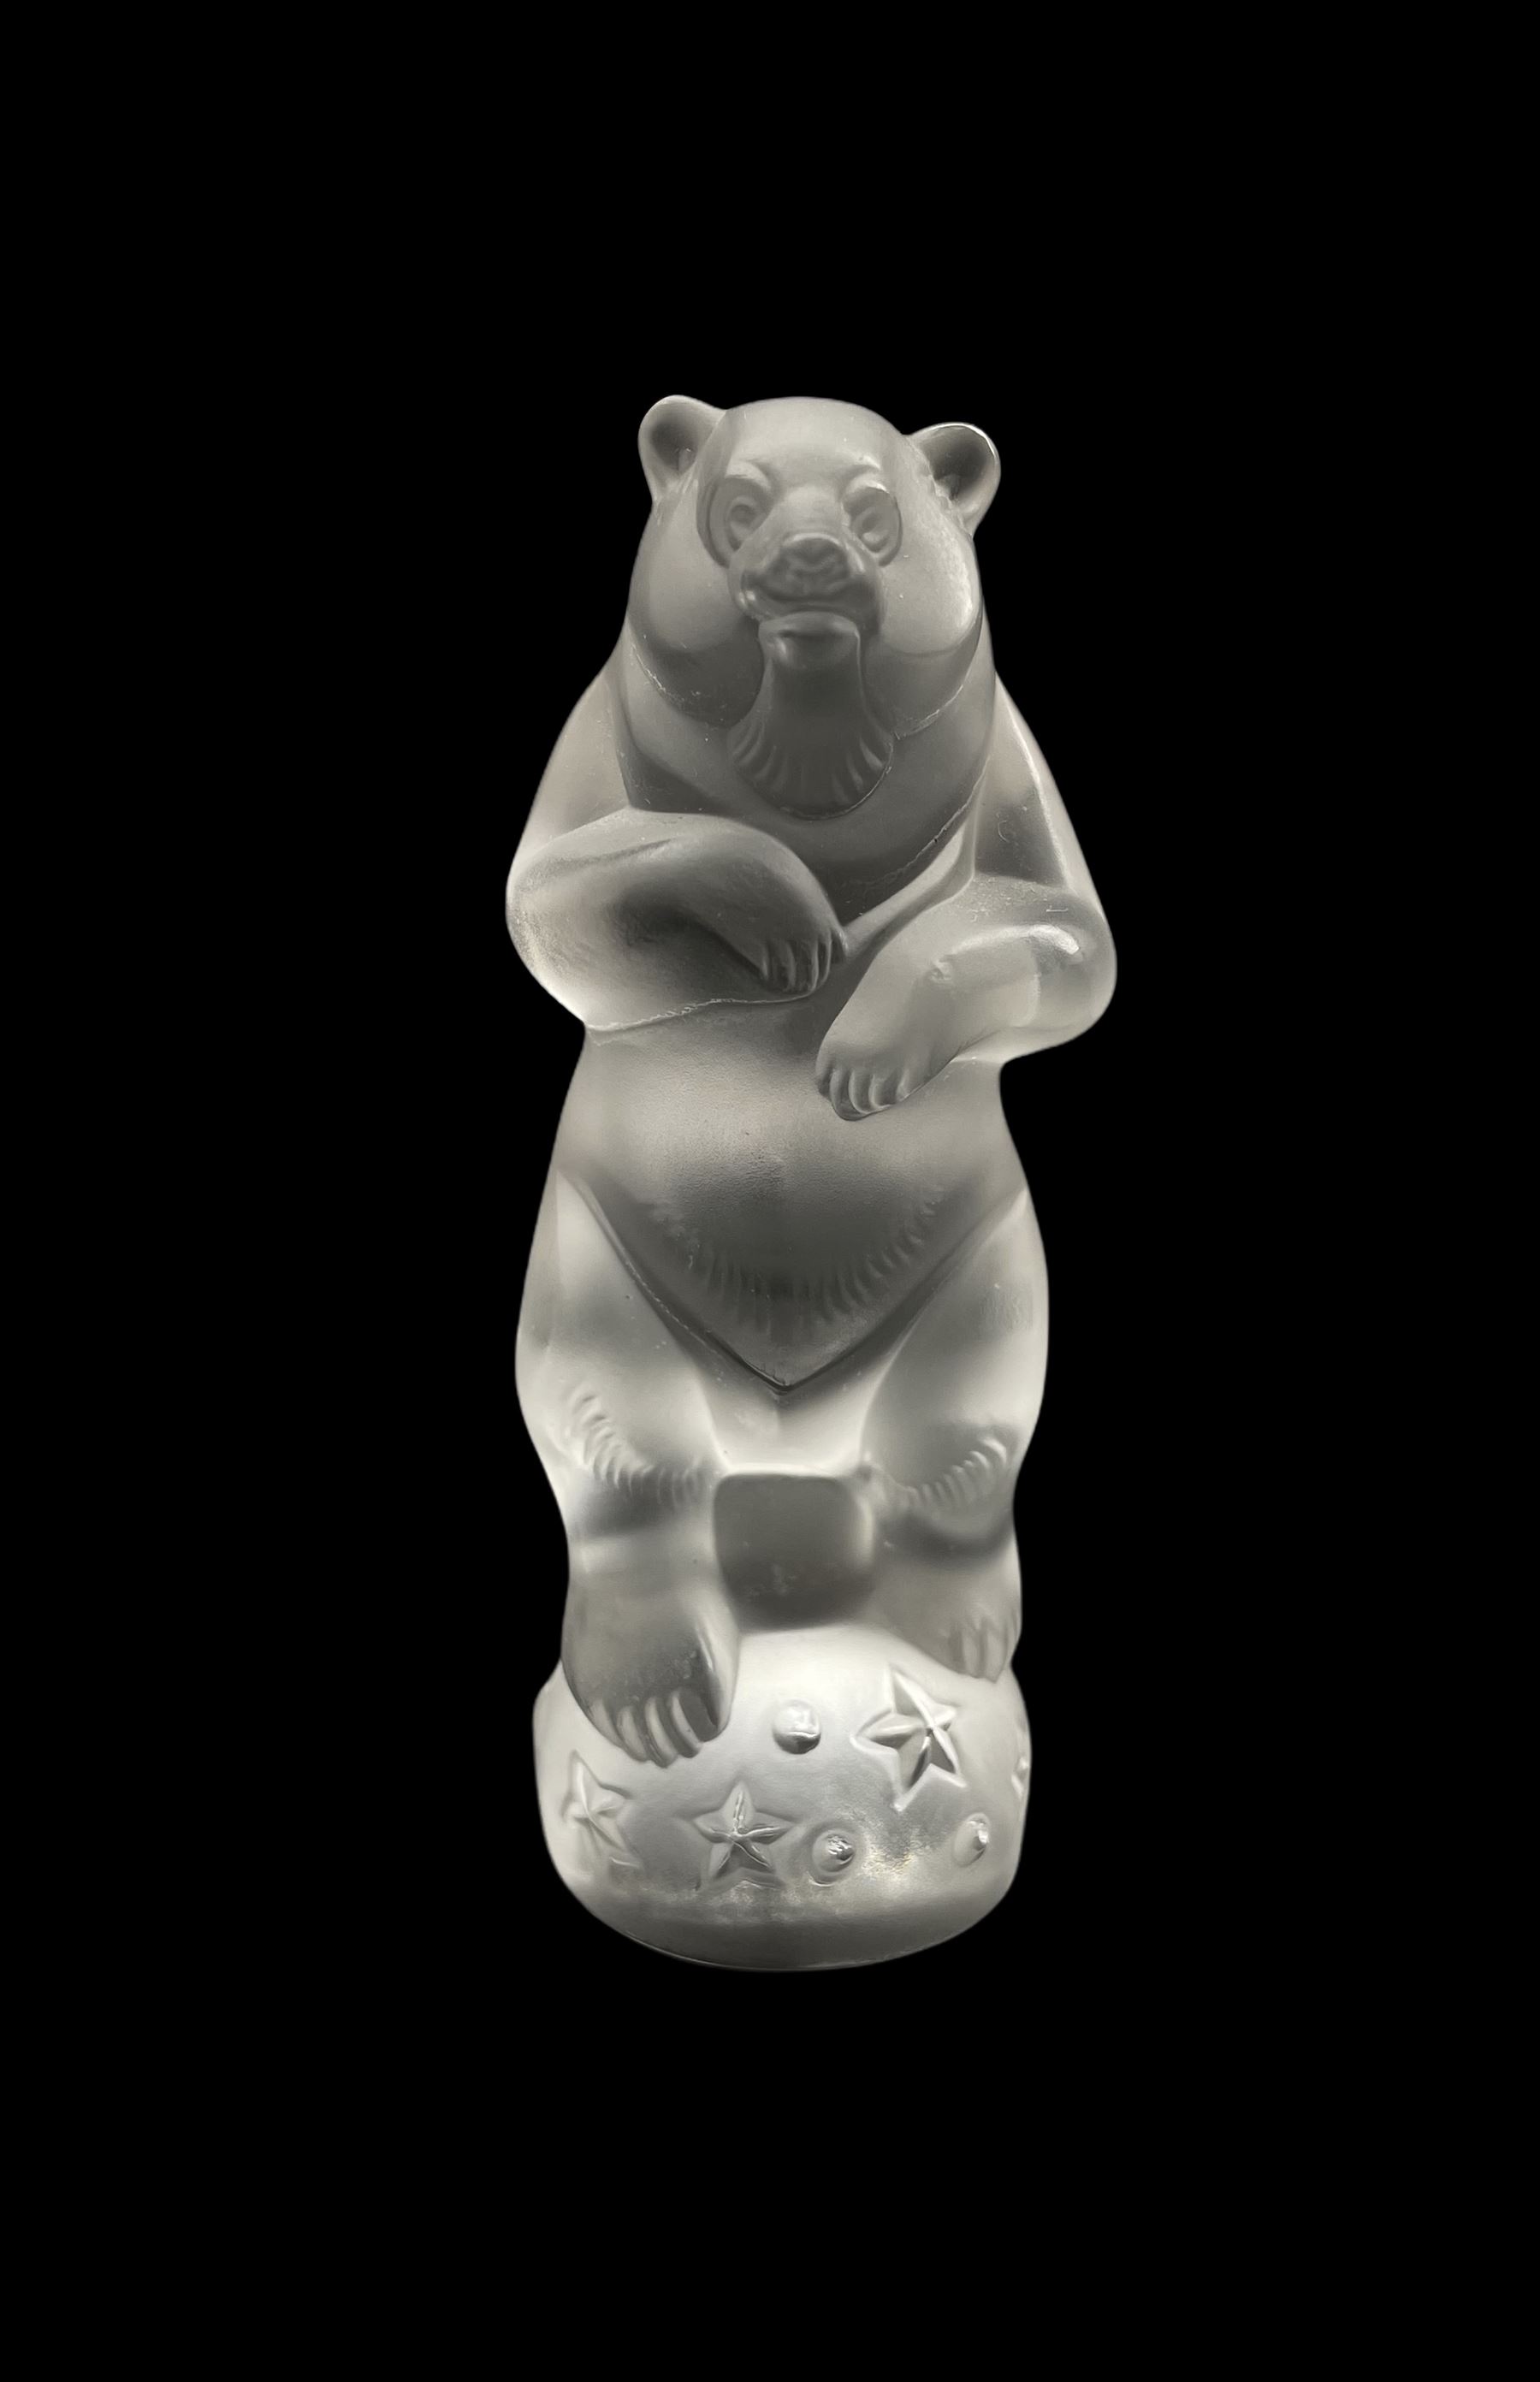 Lalique frosted glass model of a Performing Bear